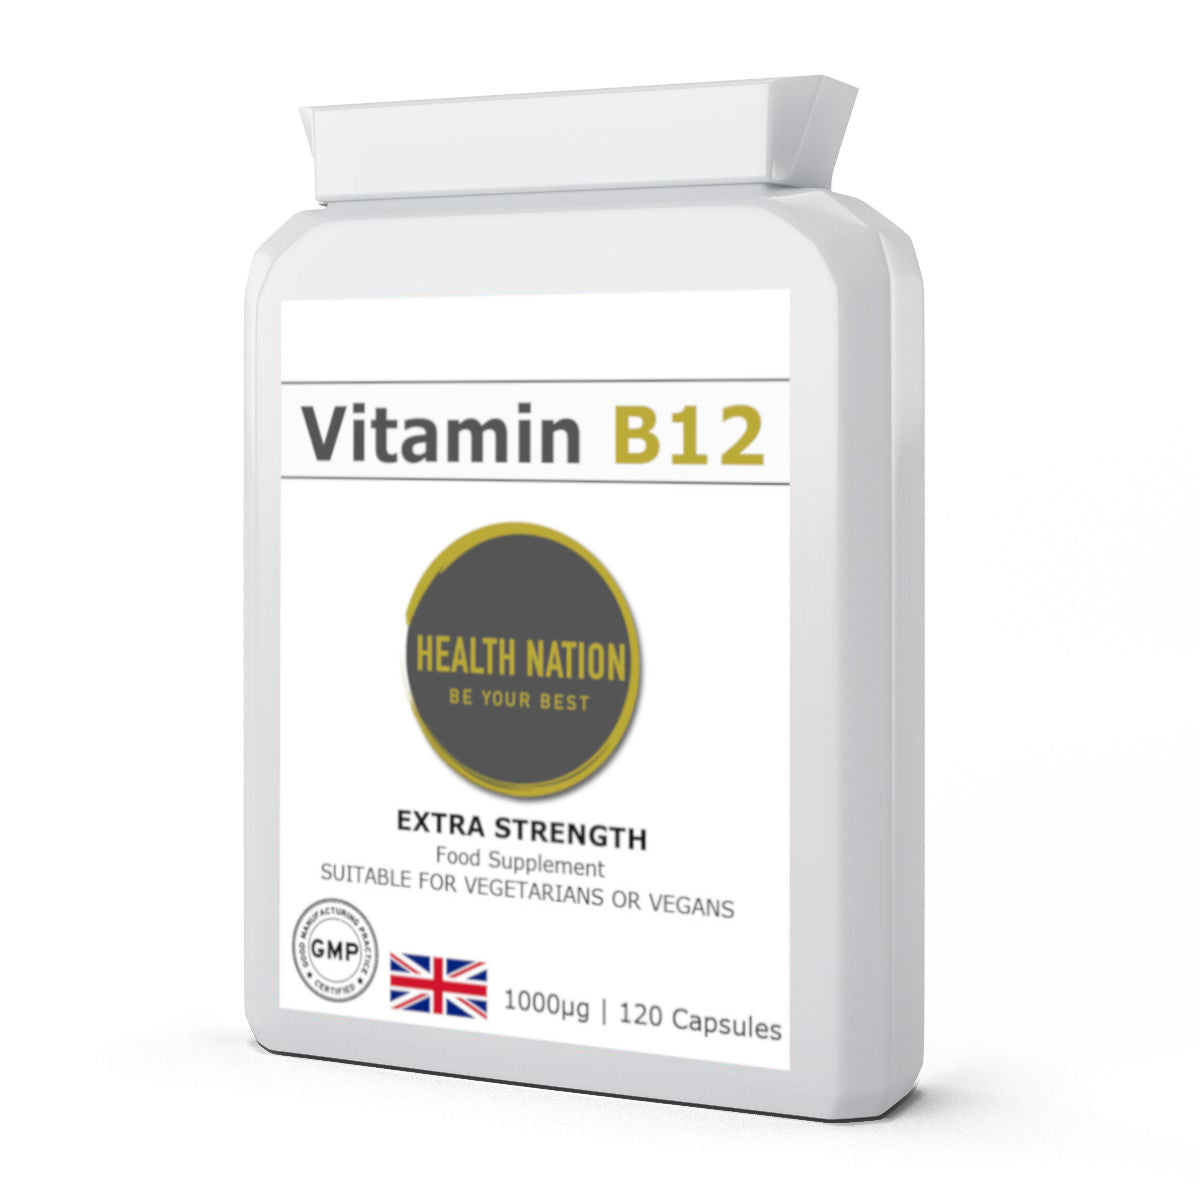 Vitamin B12 Methylcobalamin | Helps with Energy, Vibrant Skin, Hair, Mood, Mental Clarity, Fertility, Gut/Digestion and Osteoporosis | Made in UK | 1mg 120 Capsules - Health Nation